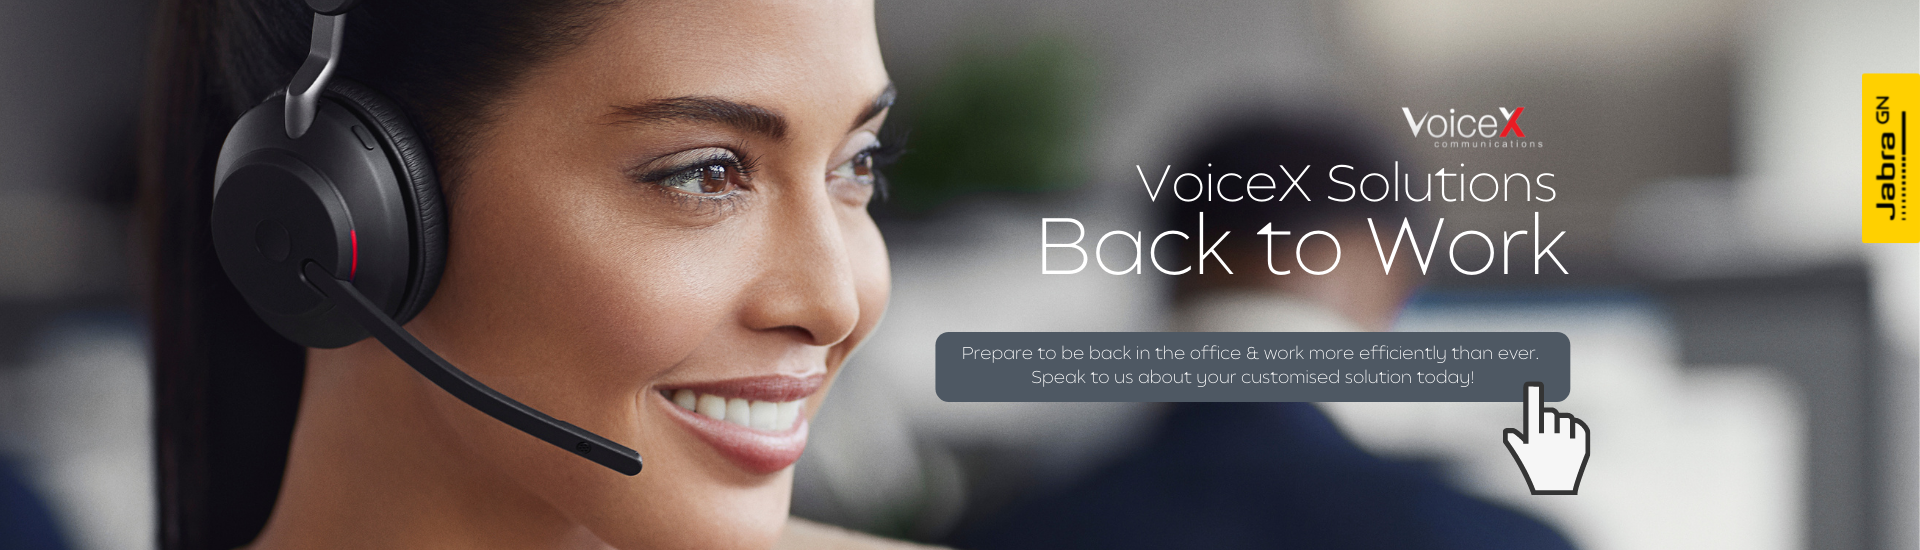 VoiceX Solutions- Back to Work